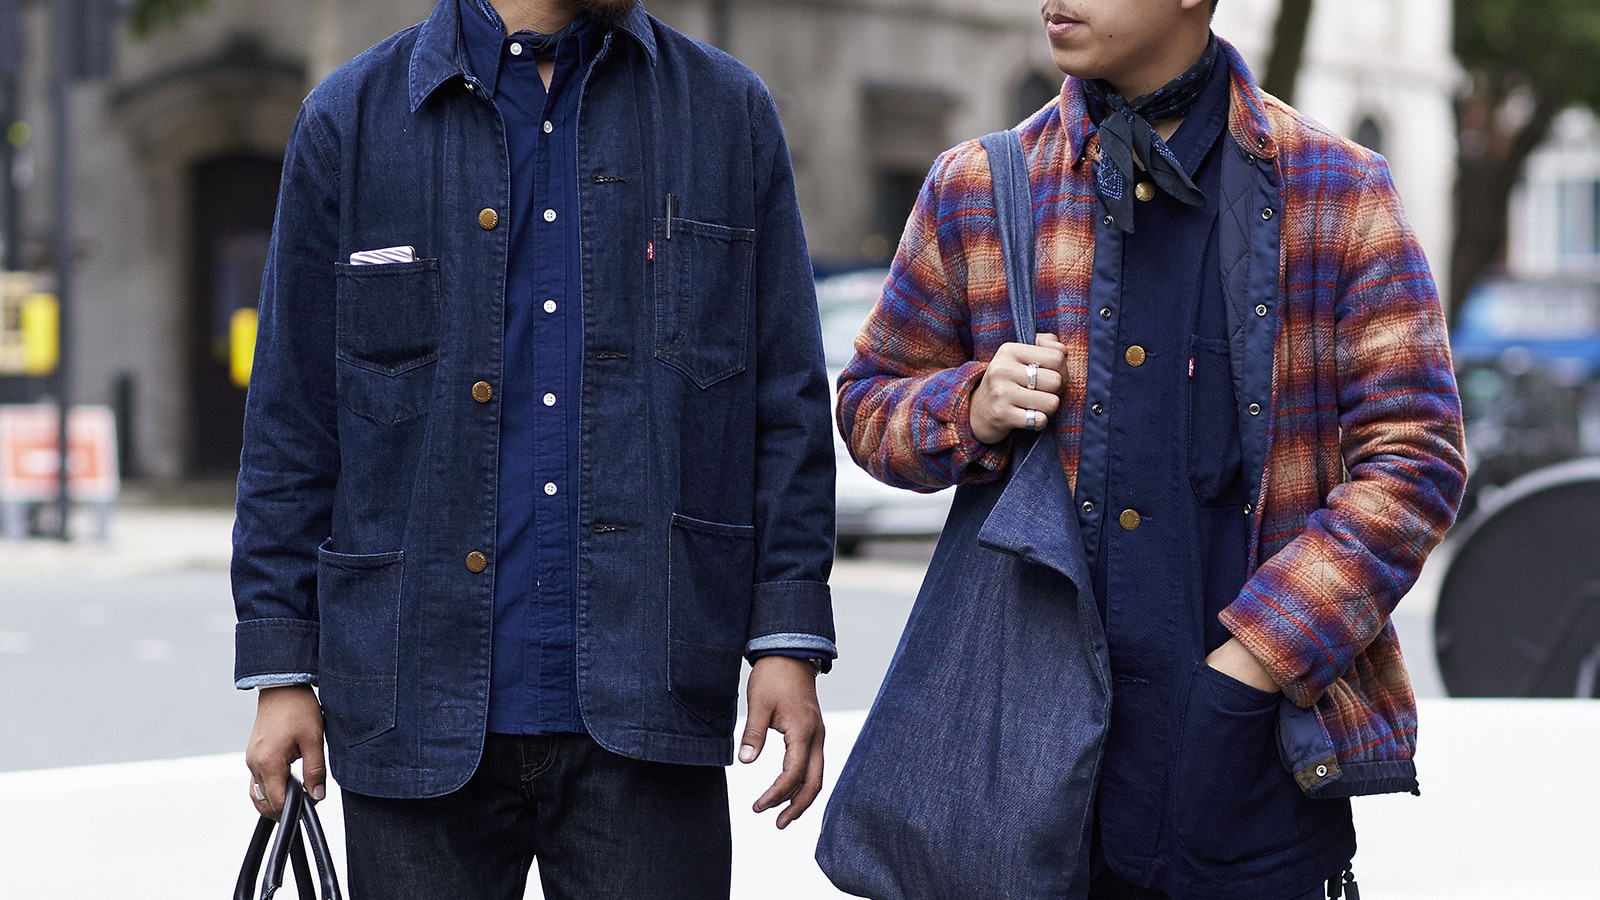 How To Make Workwear Work For You | The Journal | MR PORTER